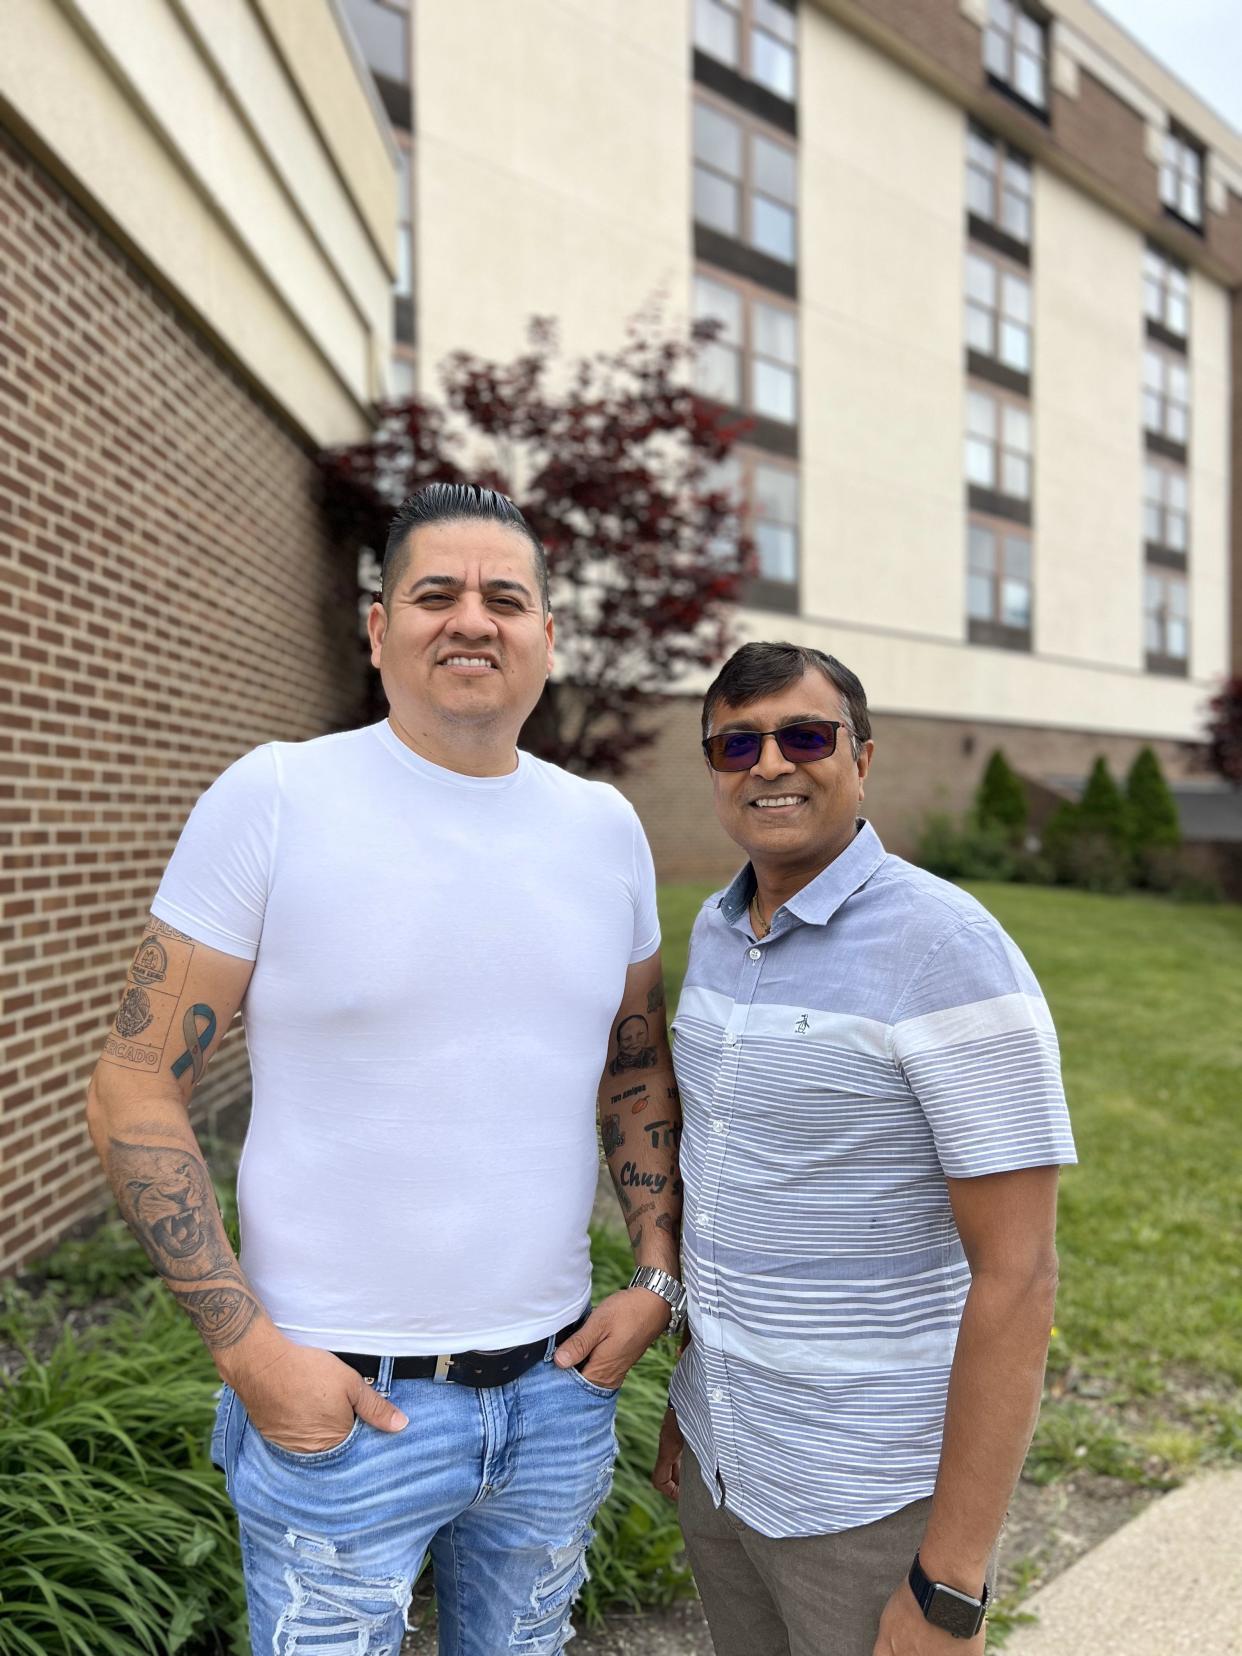 Jesus Davalos, left, who co-owns several Mexican restaurants locally, and Max Patel, an owner of Park Hospitality, the former Holiday Inn at 116 Park Avenue West, have partnered to open a new restaurant Cancun Tacos & Margaritas inside the downtown hotel.